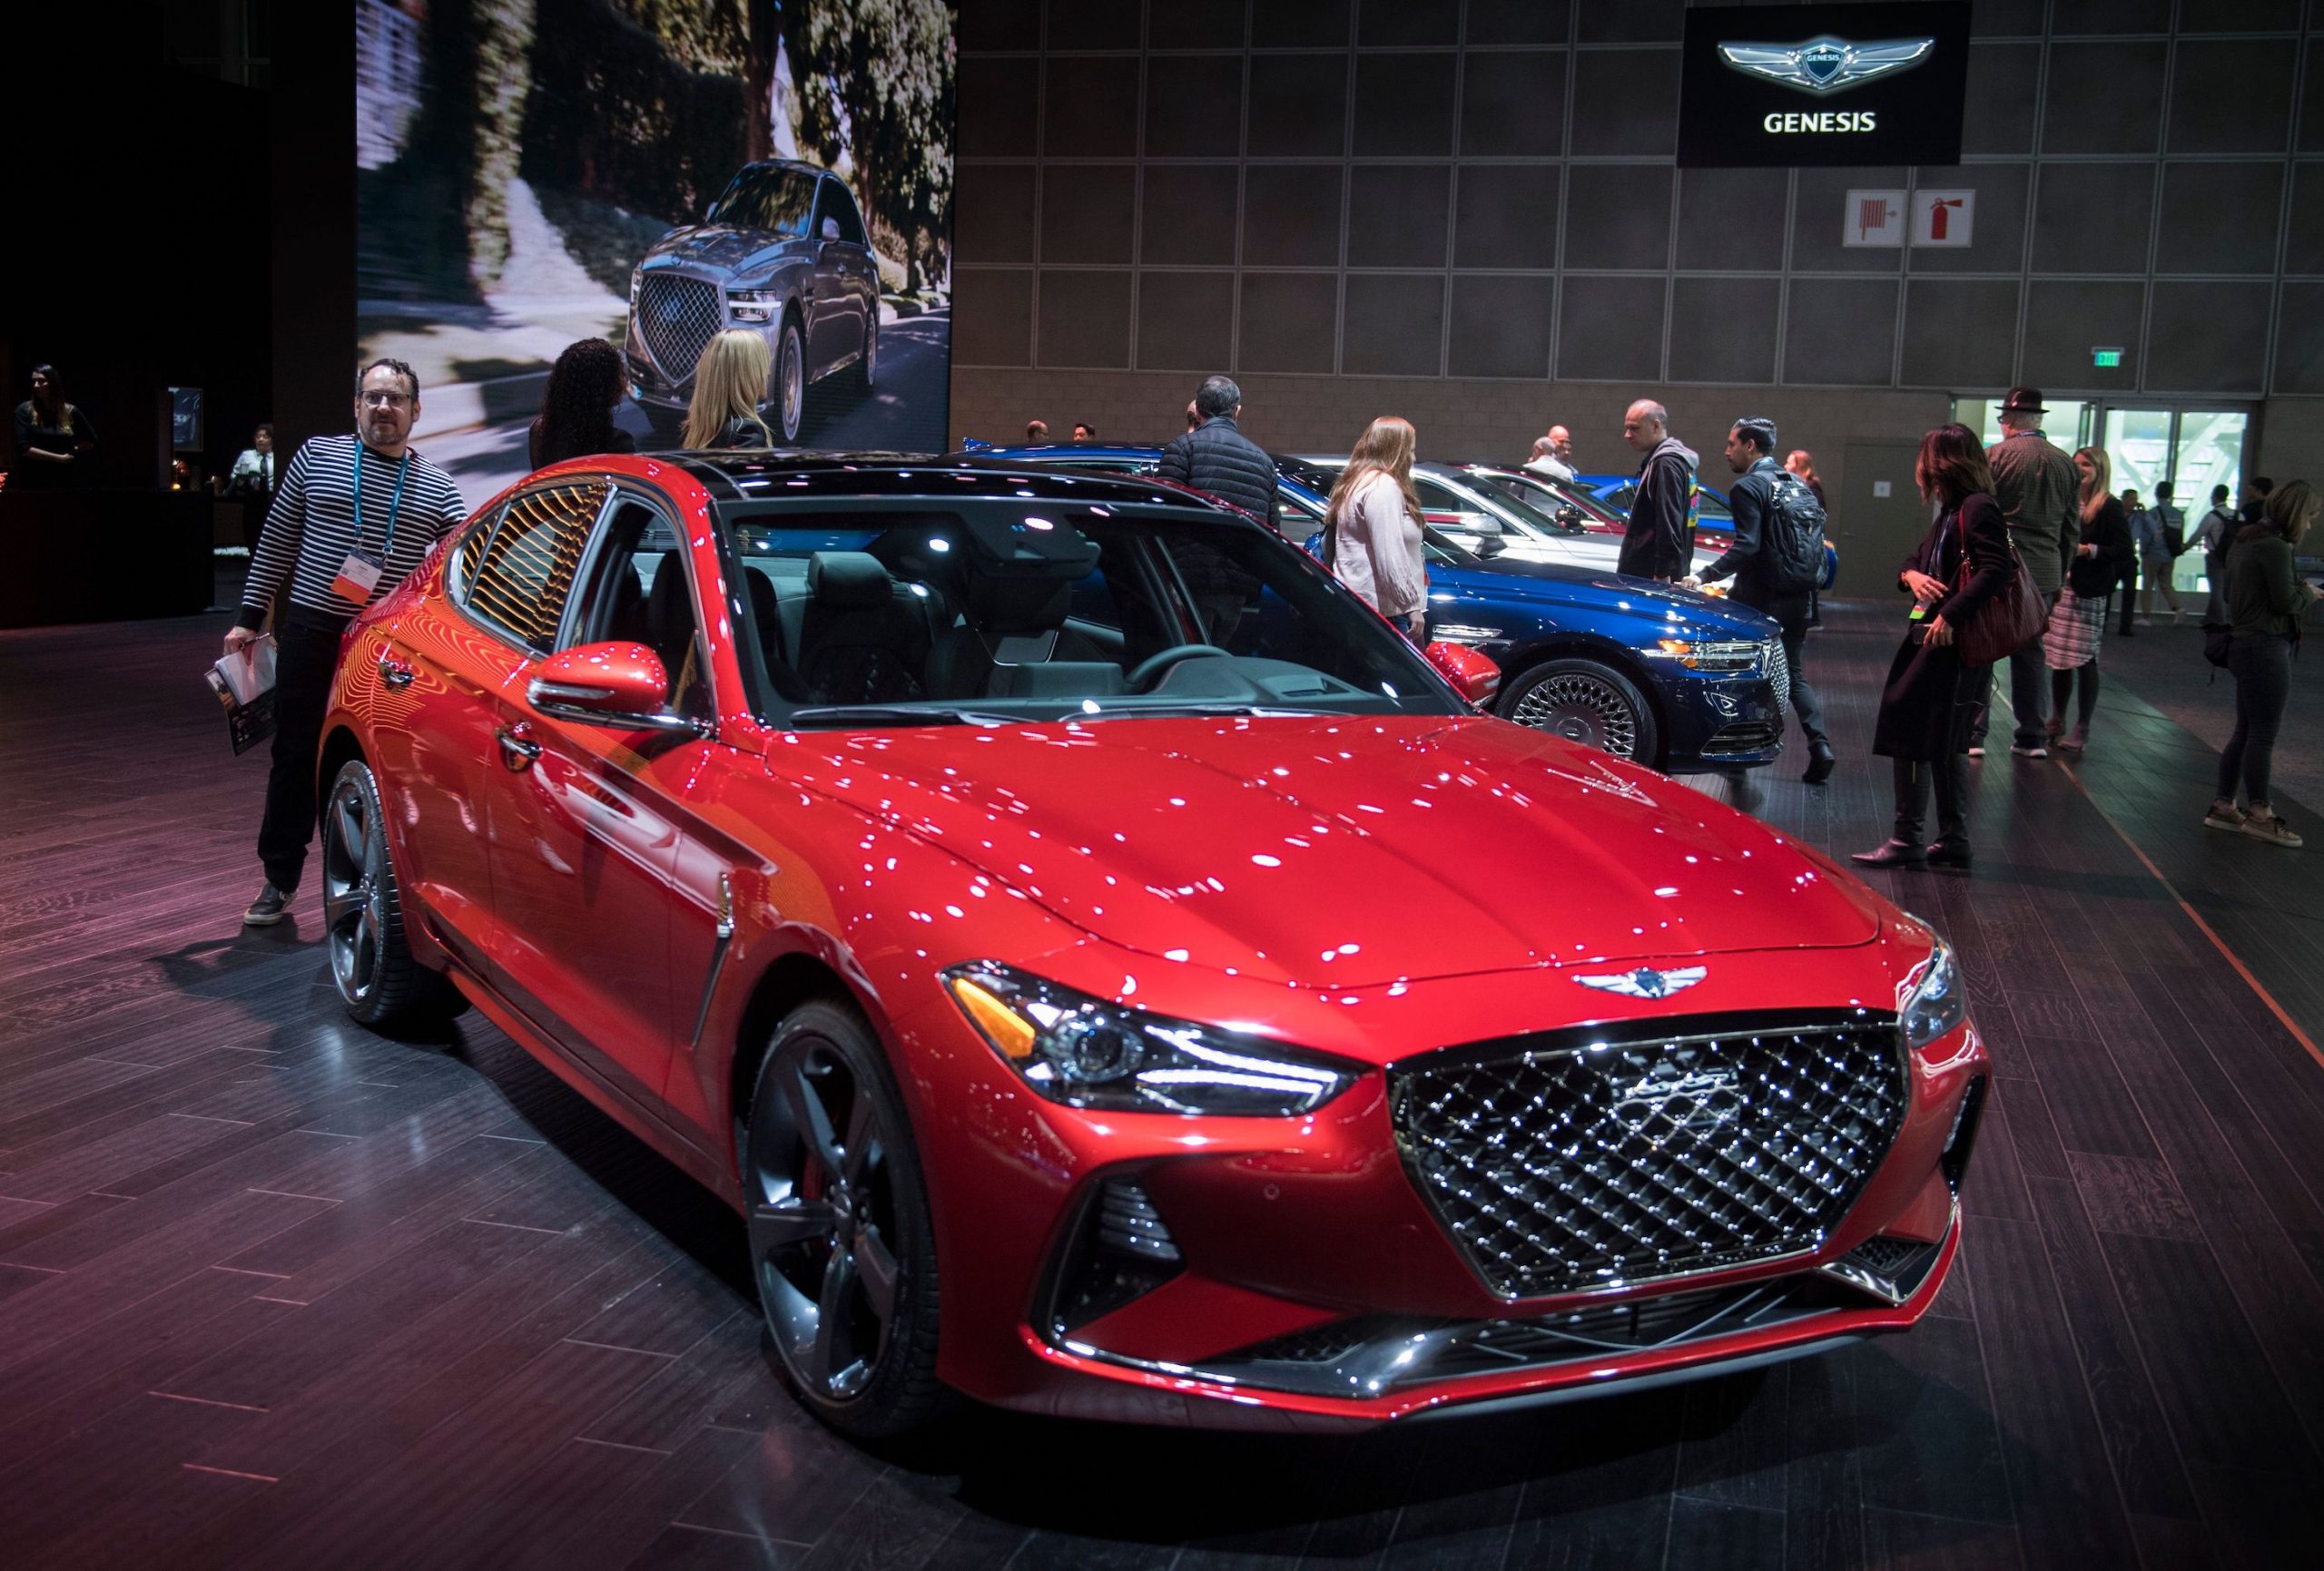 The red Genesis G70 car on display during the AutoMobility LA event, at the 2019 Los Angeles Auto Show